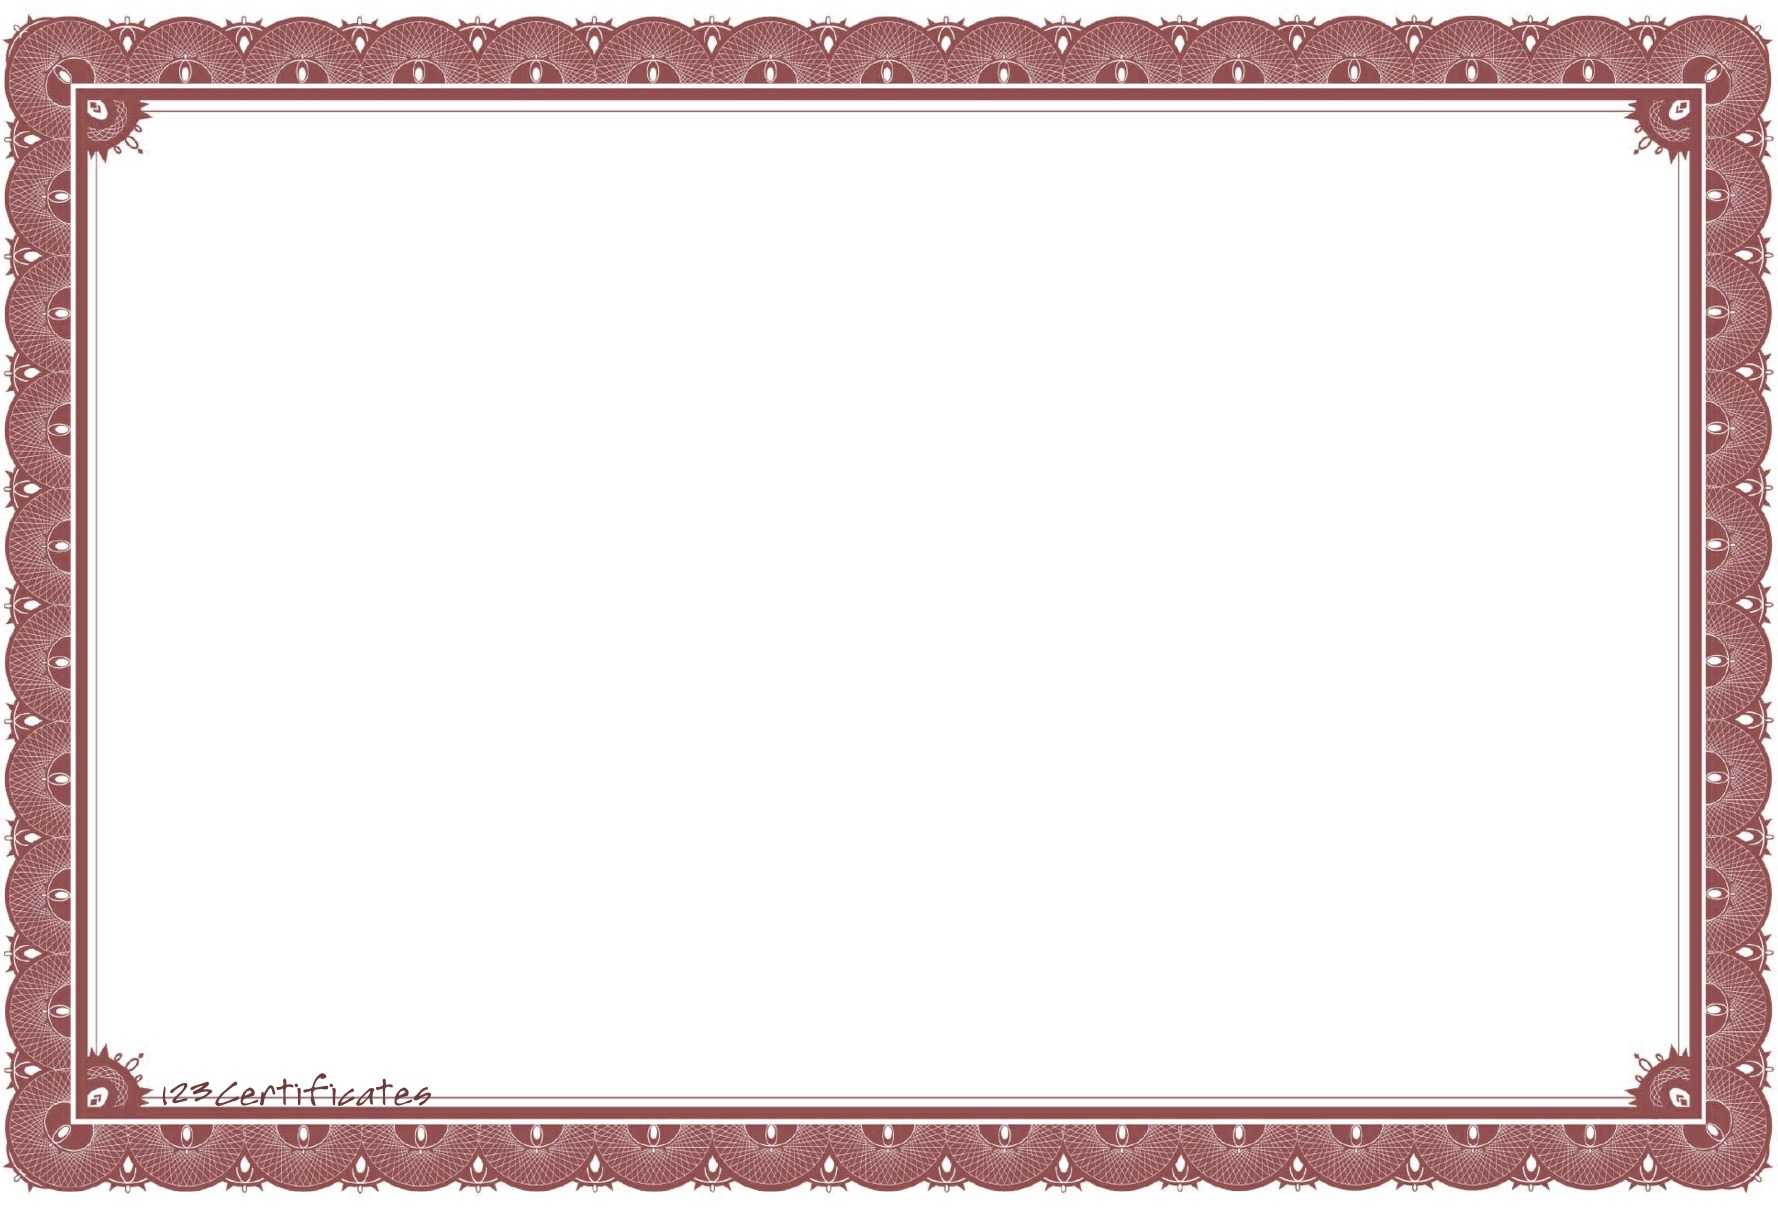 Free Certificate Border, Download Free Clip Art, Free Clip Pertaining To Free Printable Certificate Border Templates